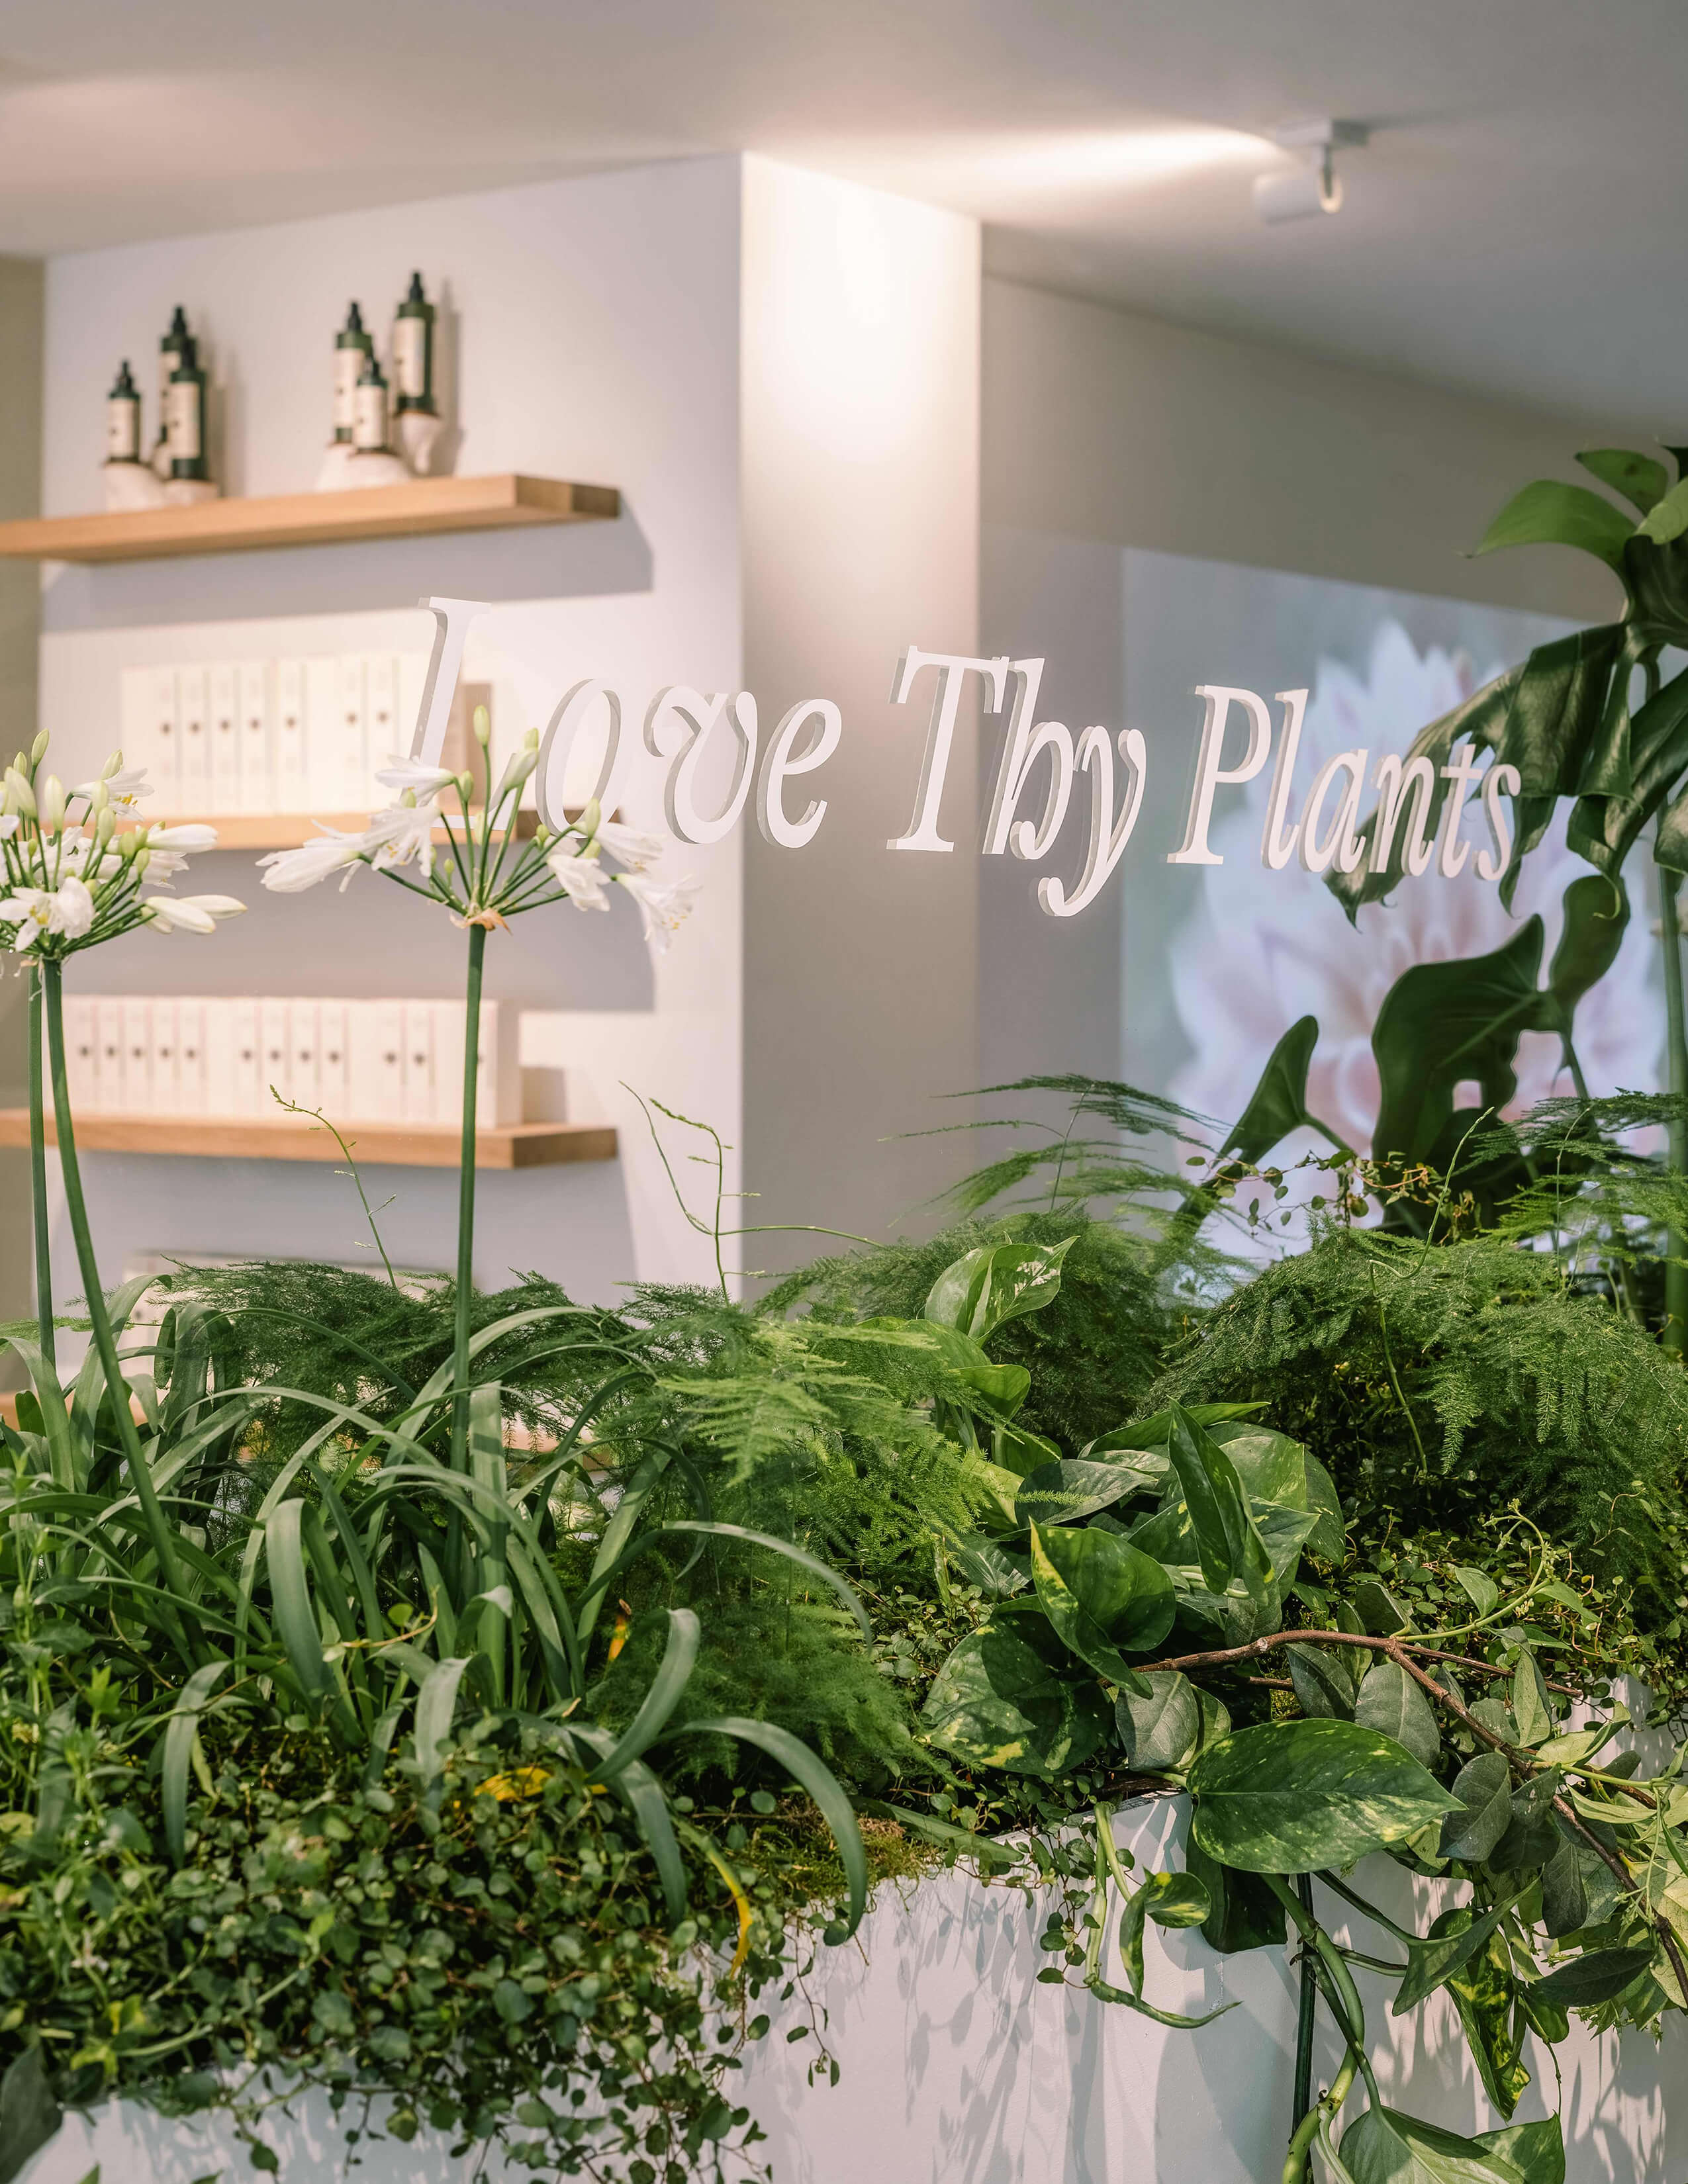 A closer angle of different kinds of plants is presented on the white wall with the ‘Love Thy Plants’ window shop.